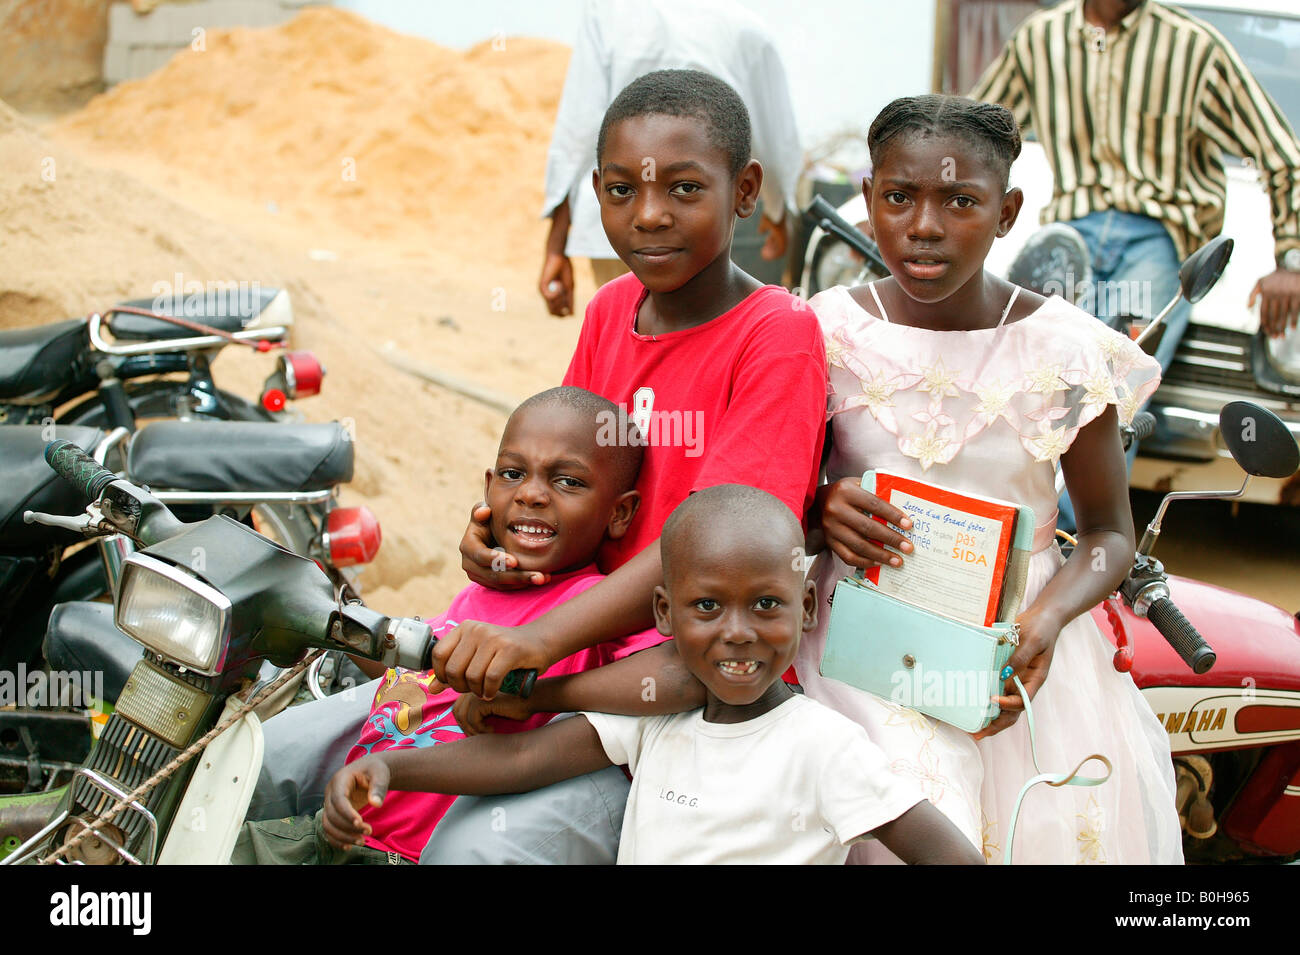 Four children sitting on a motor scooter Douala, Cameroon, Africa Stock Photo